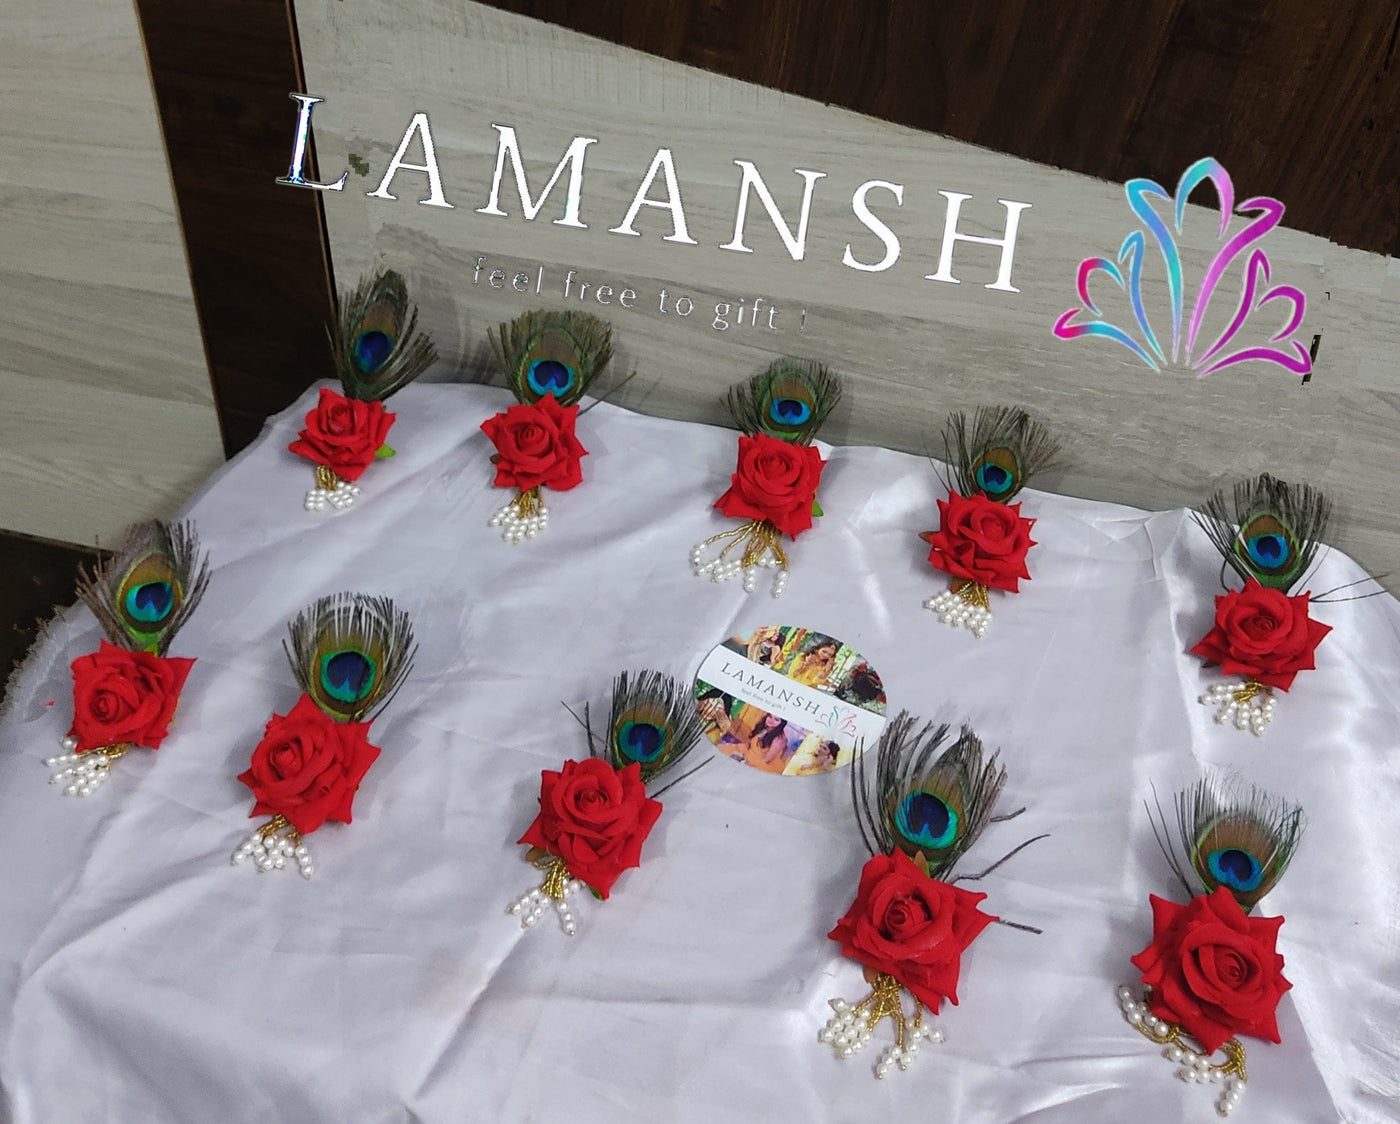 LAMANSH Floral 🌺 Giveaways Red / Set of 25 Broaches LAMANSH® (Set of 25) Artificial Red Rose Flower Brooches / Bridesmaid Giveaway set